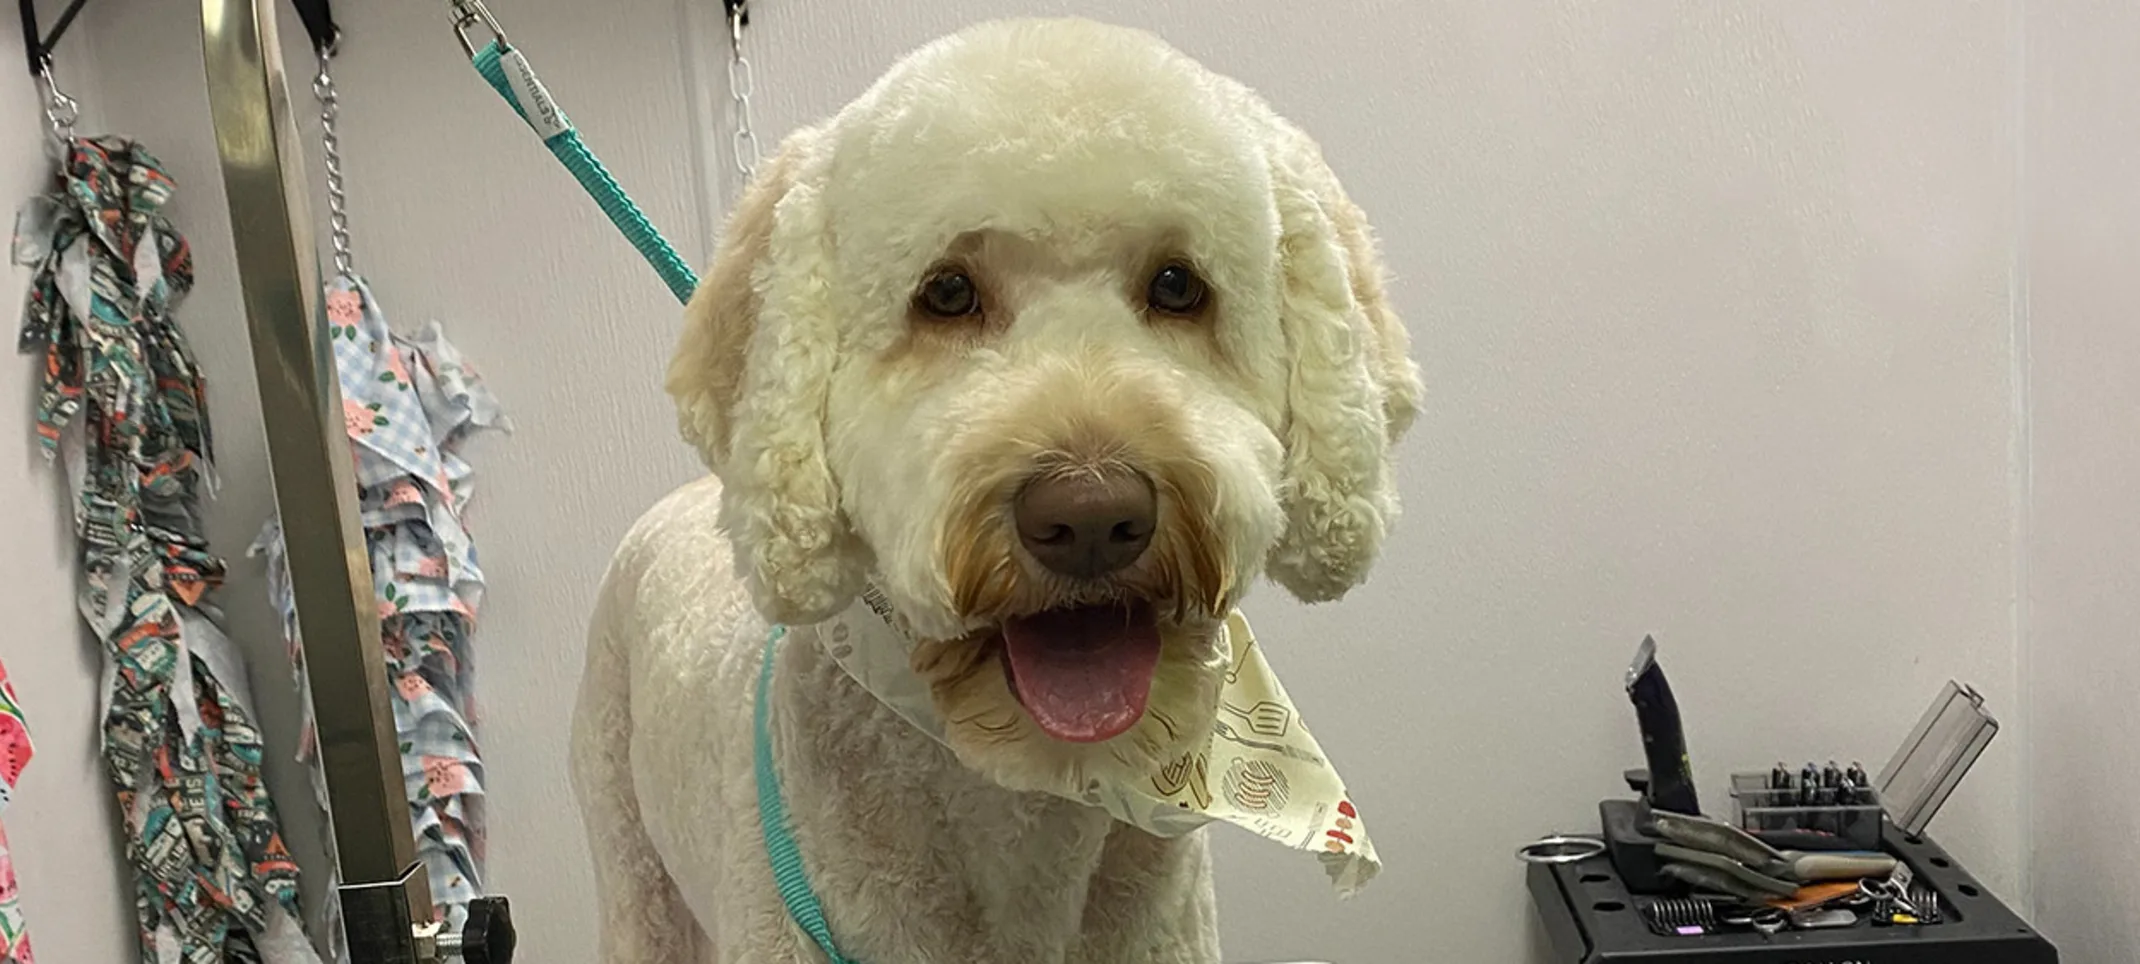 A white dog standing on a grooming table